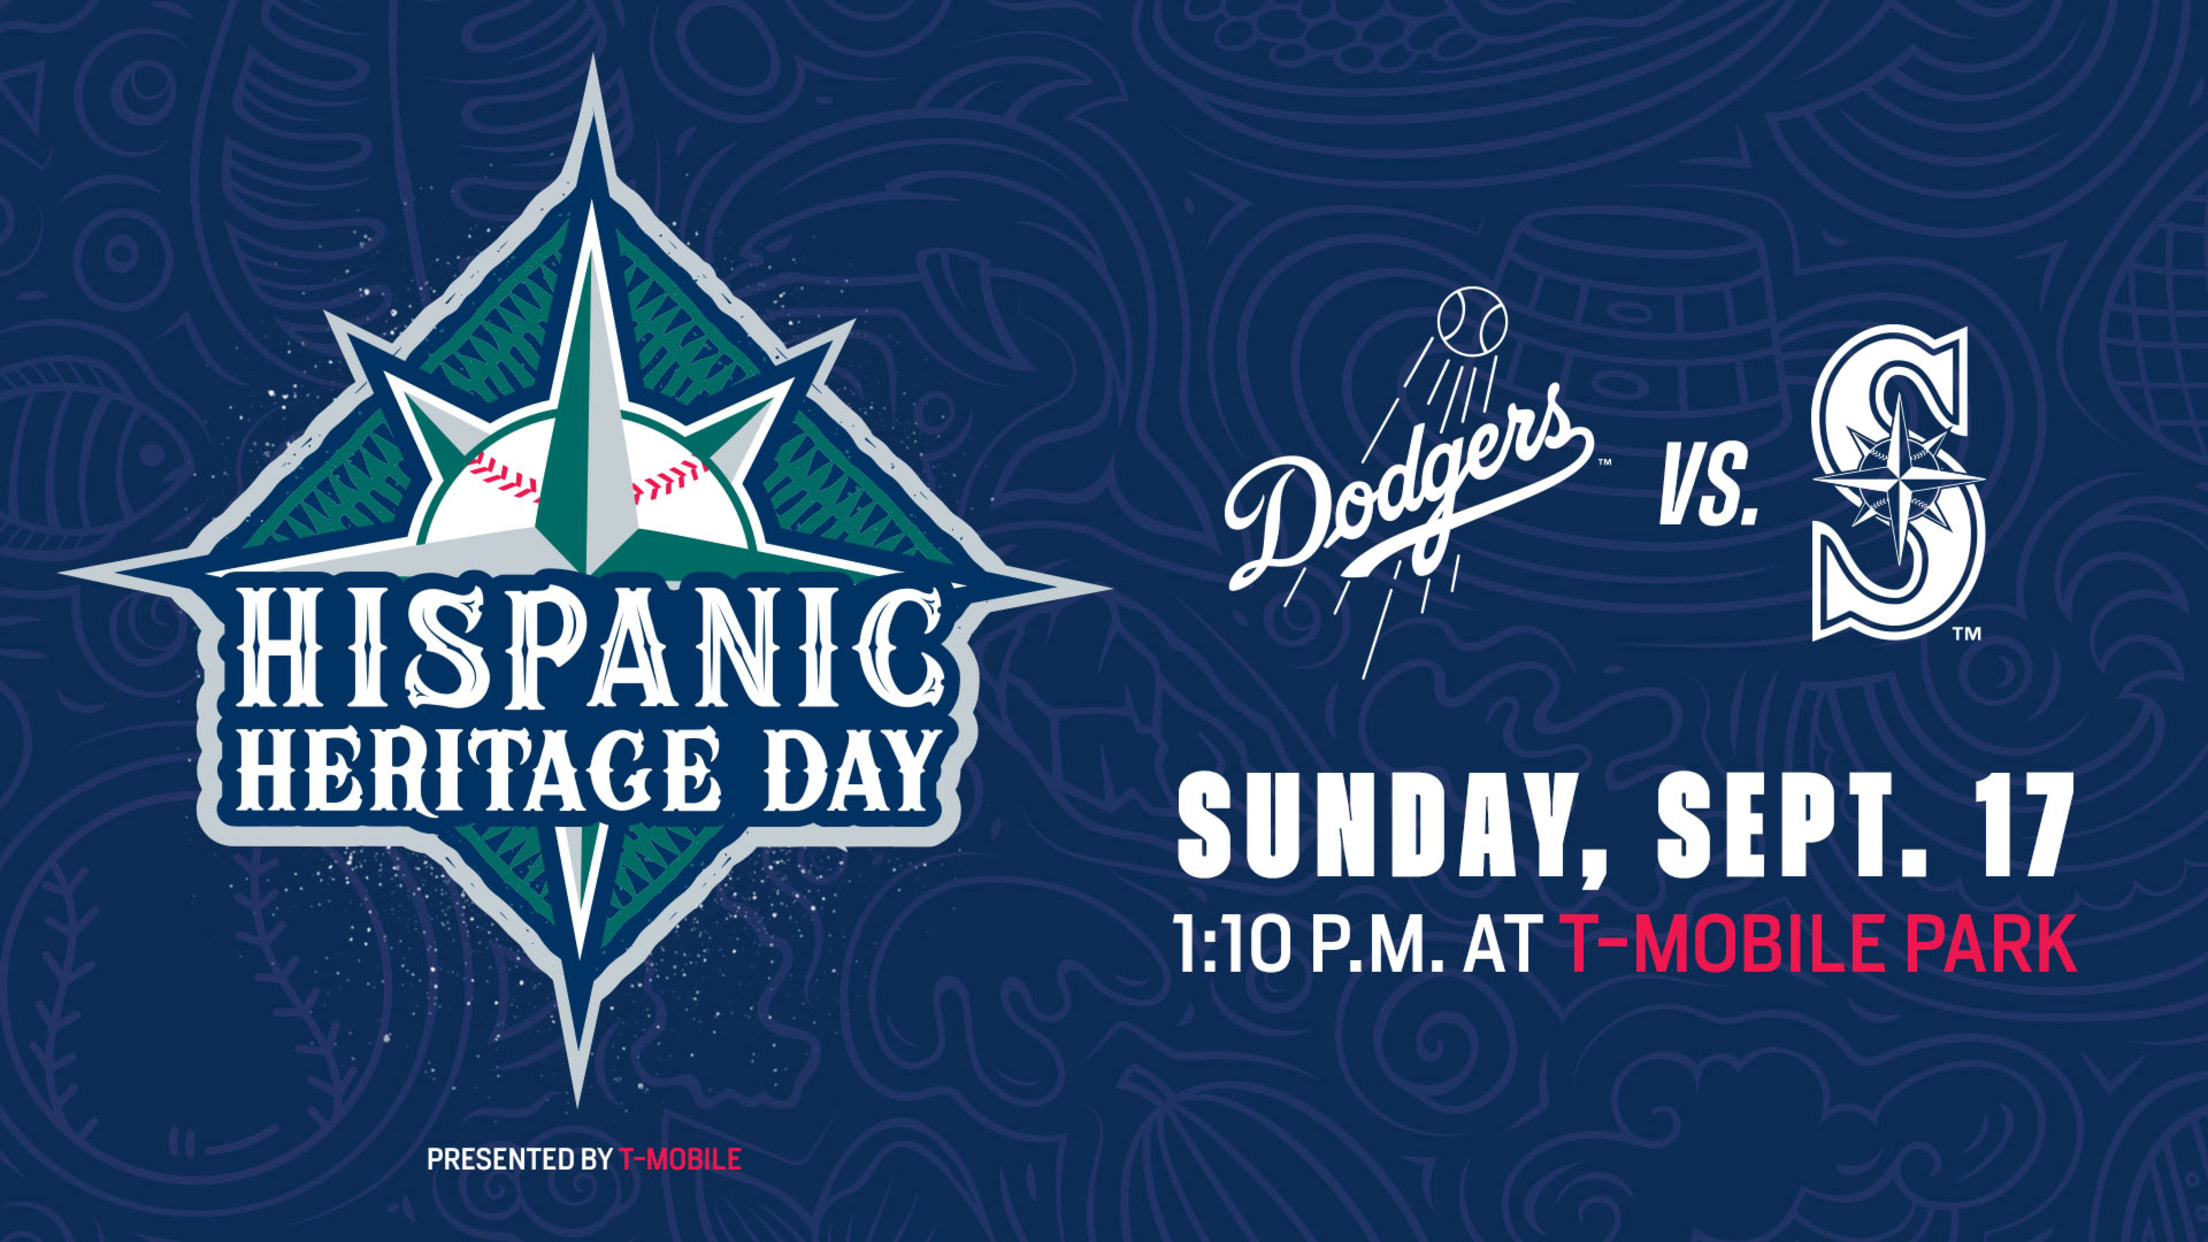 Coming to Mexican Heritage Day - Los Angeles Dodgers